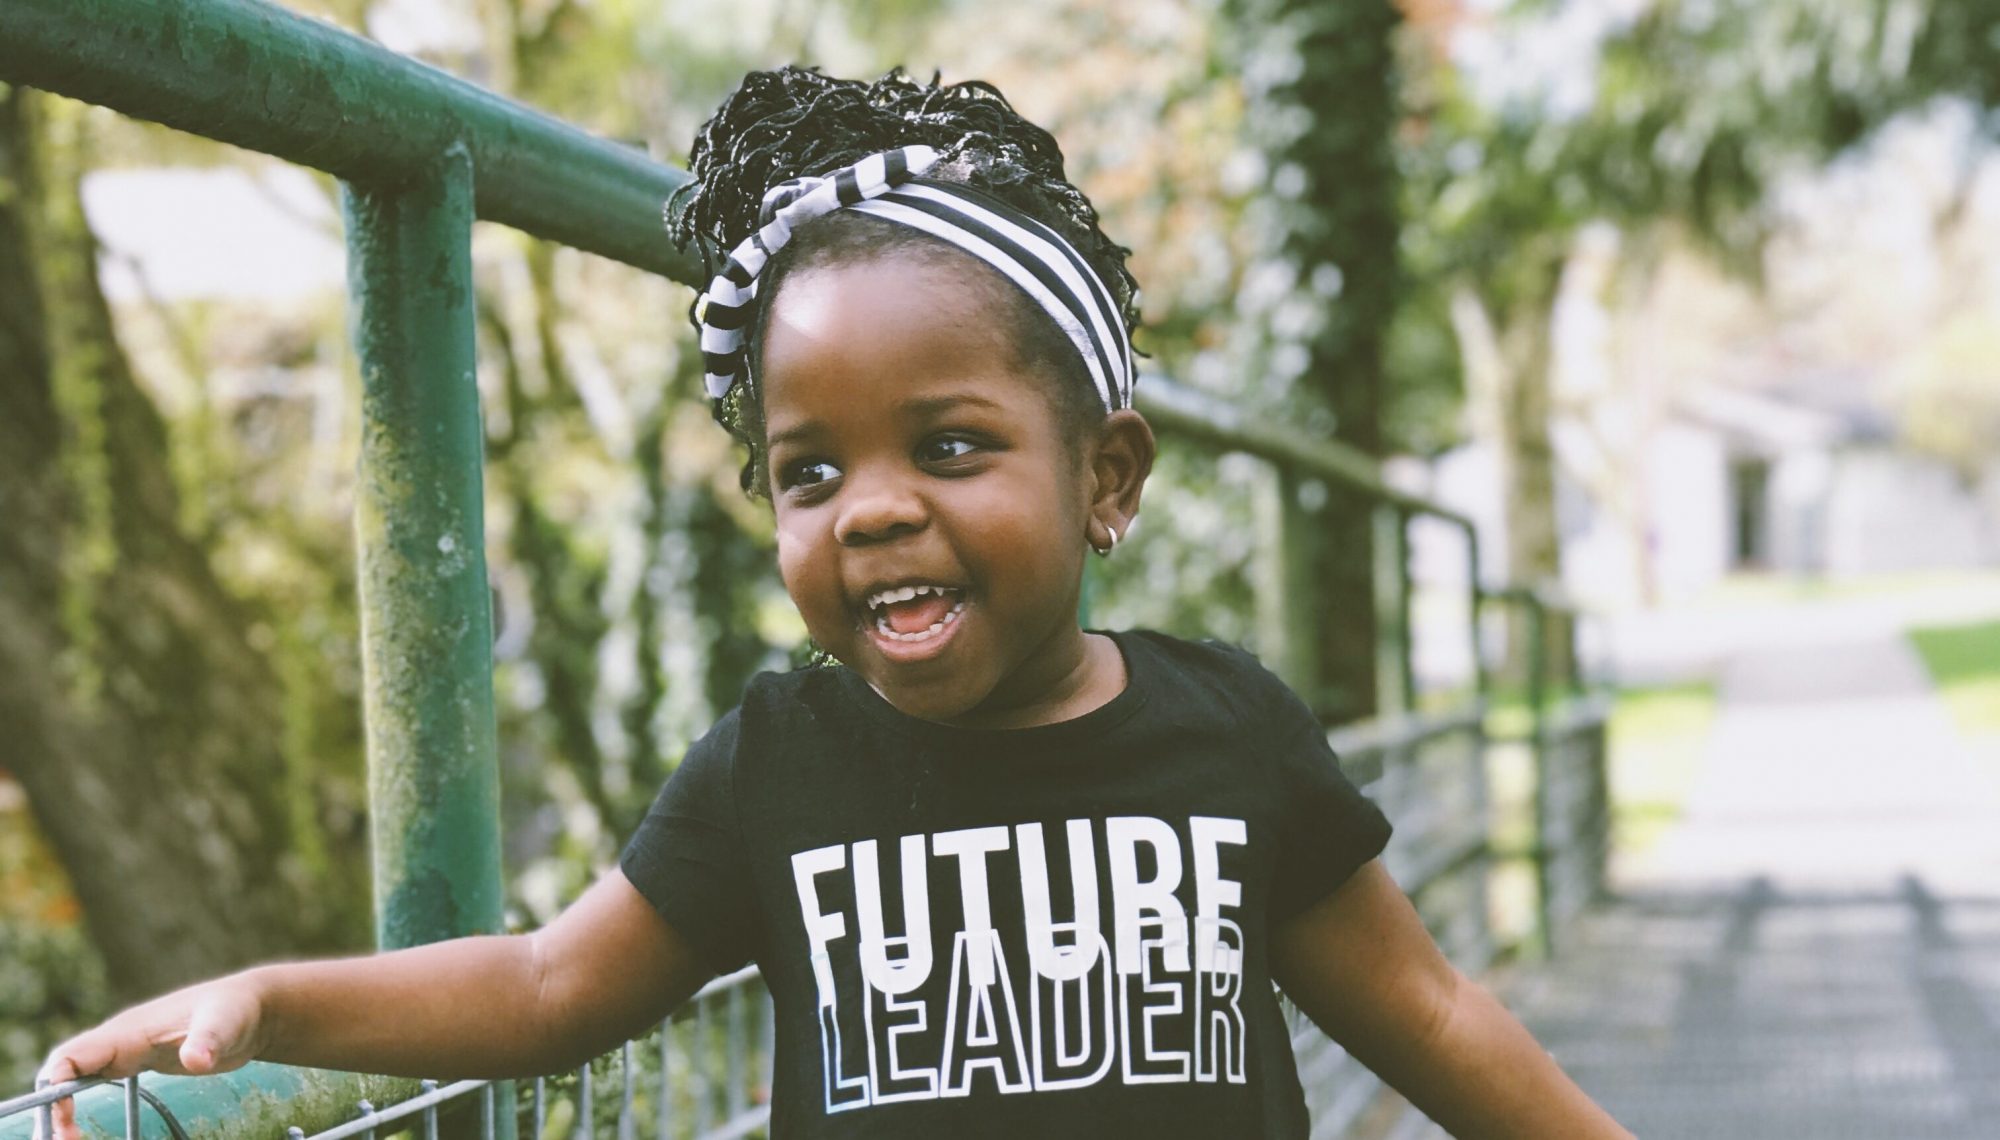 young girl wearing a t shirt with the slogan 'future leader'